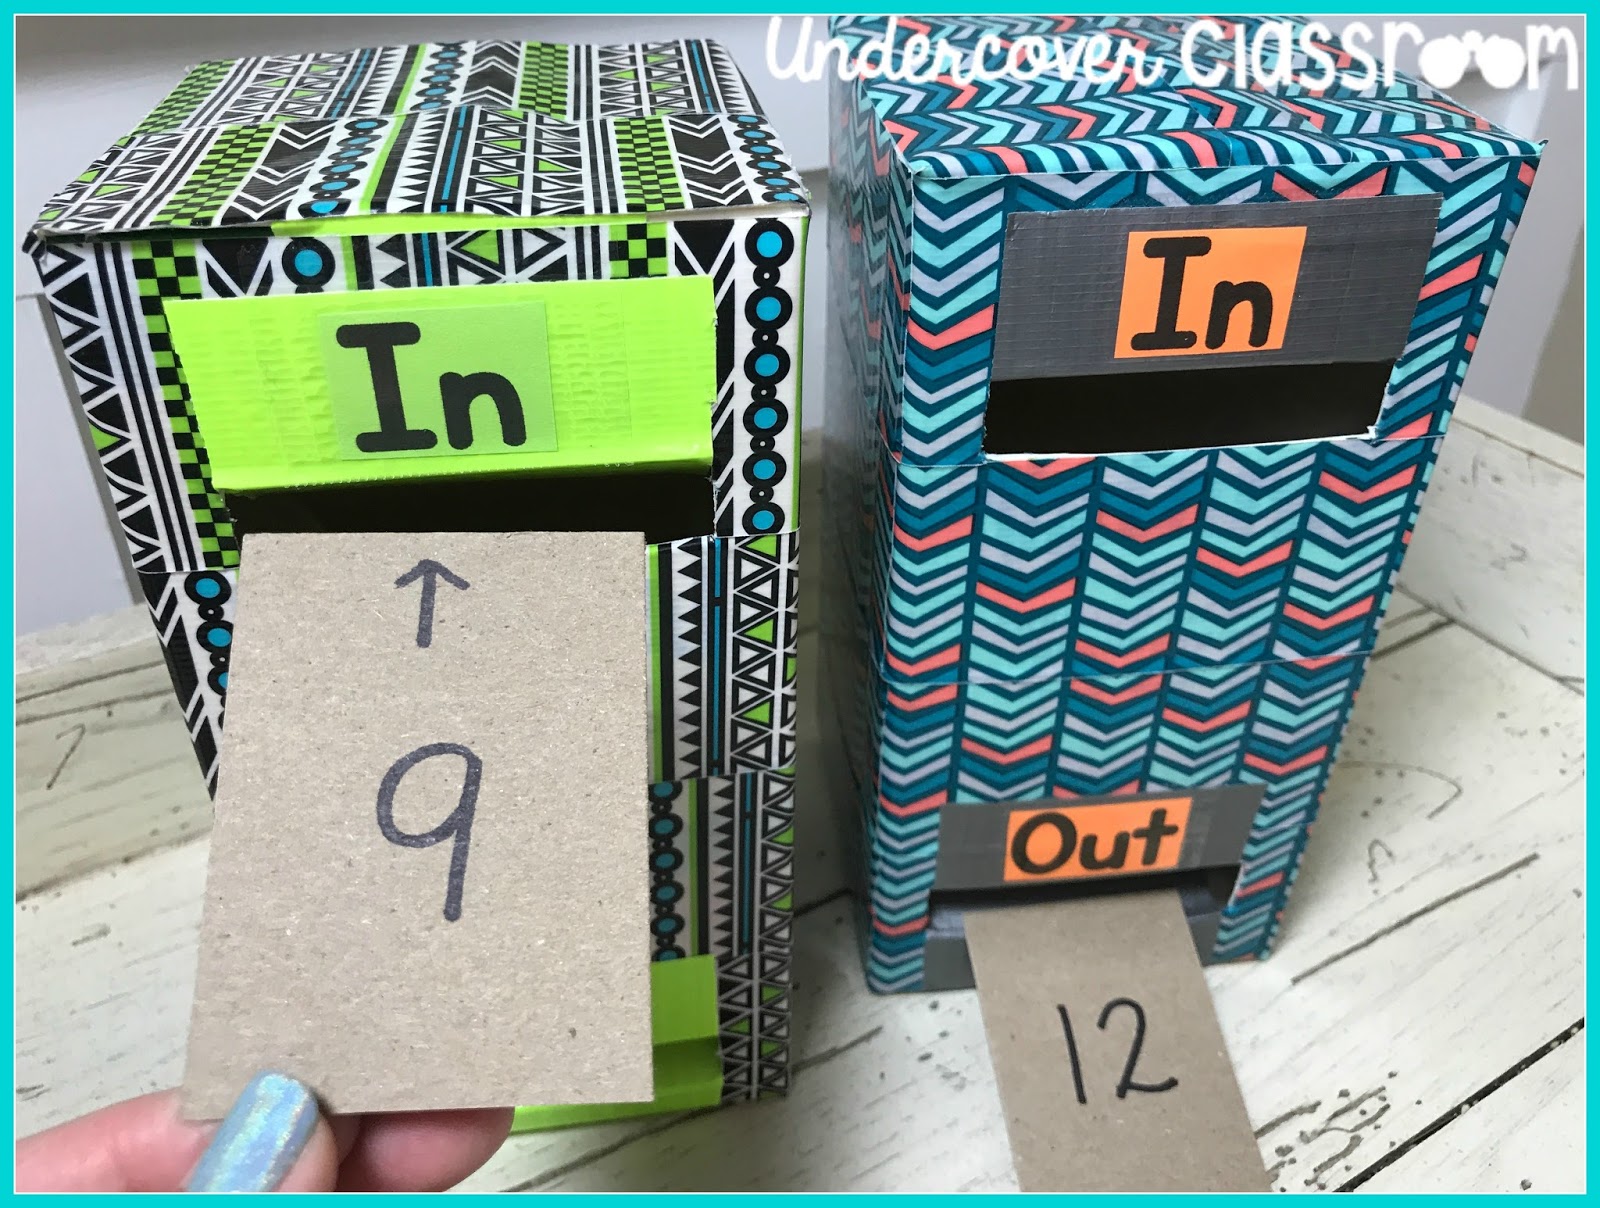 Turn an empty juice carton into a number function box that will introduce your students to algebraic thinking. Here's a tutorial that will teach you how to make a chute that "magically" flips your number cards over inside an in and out machine.